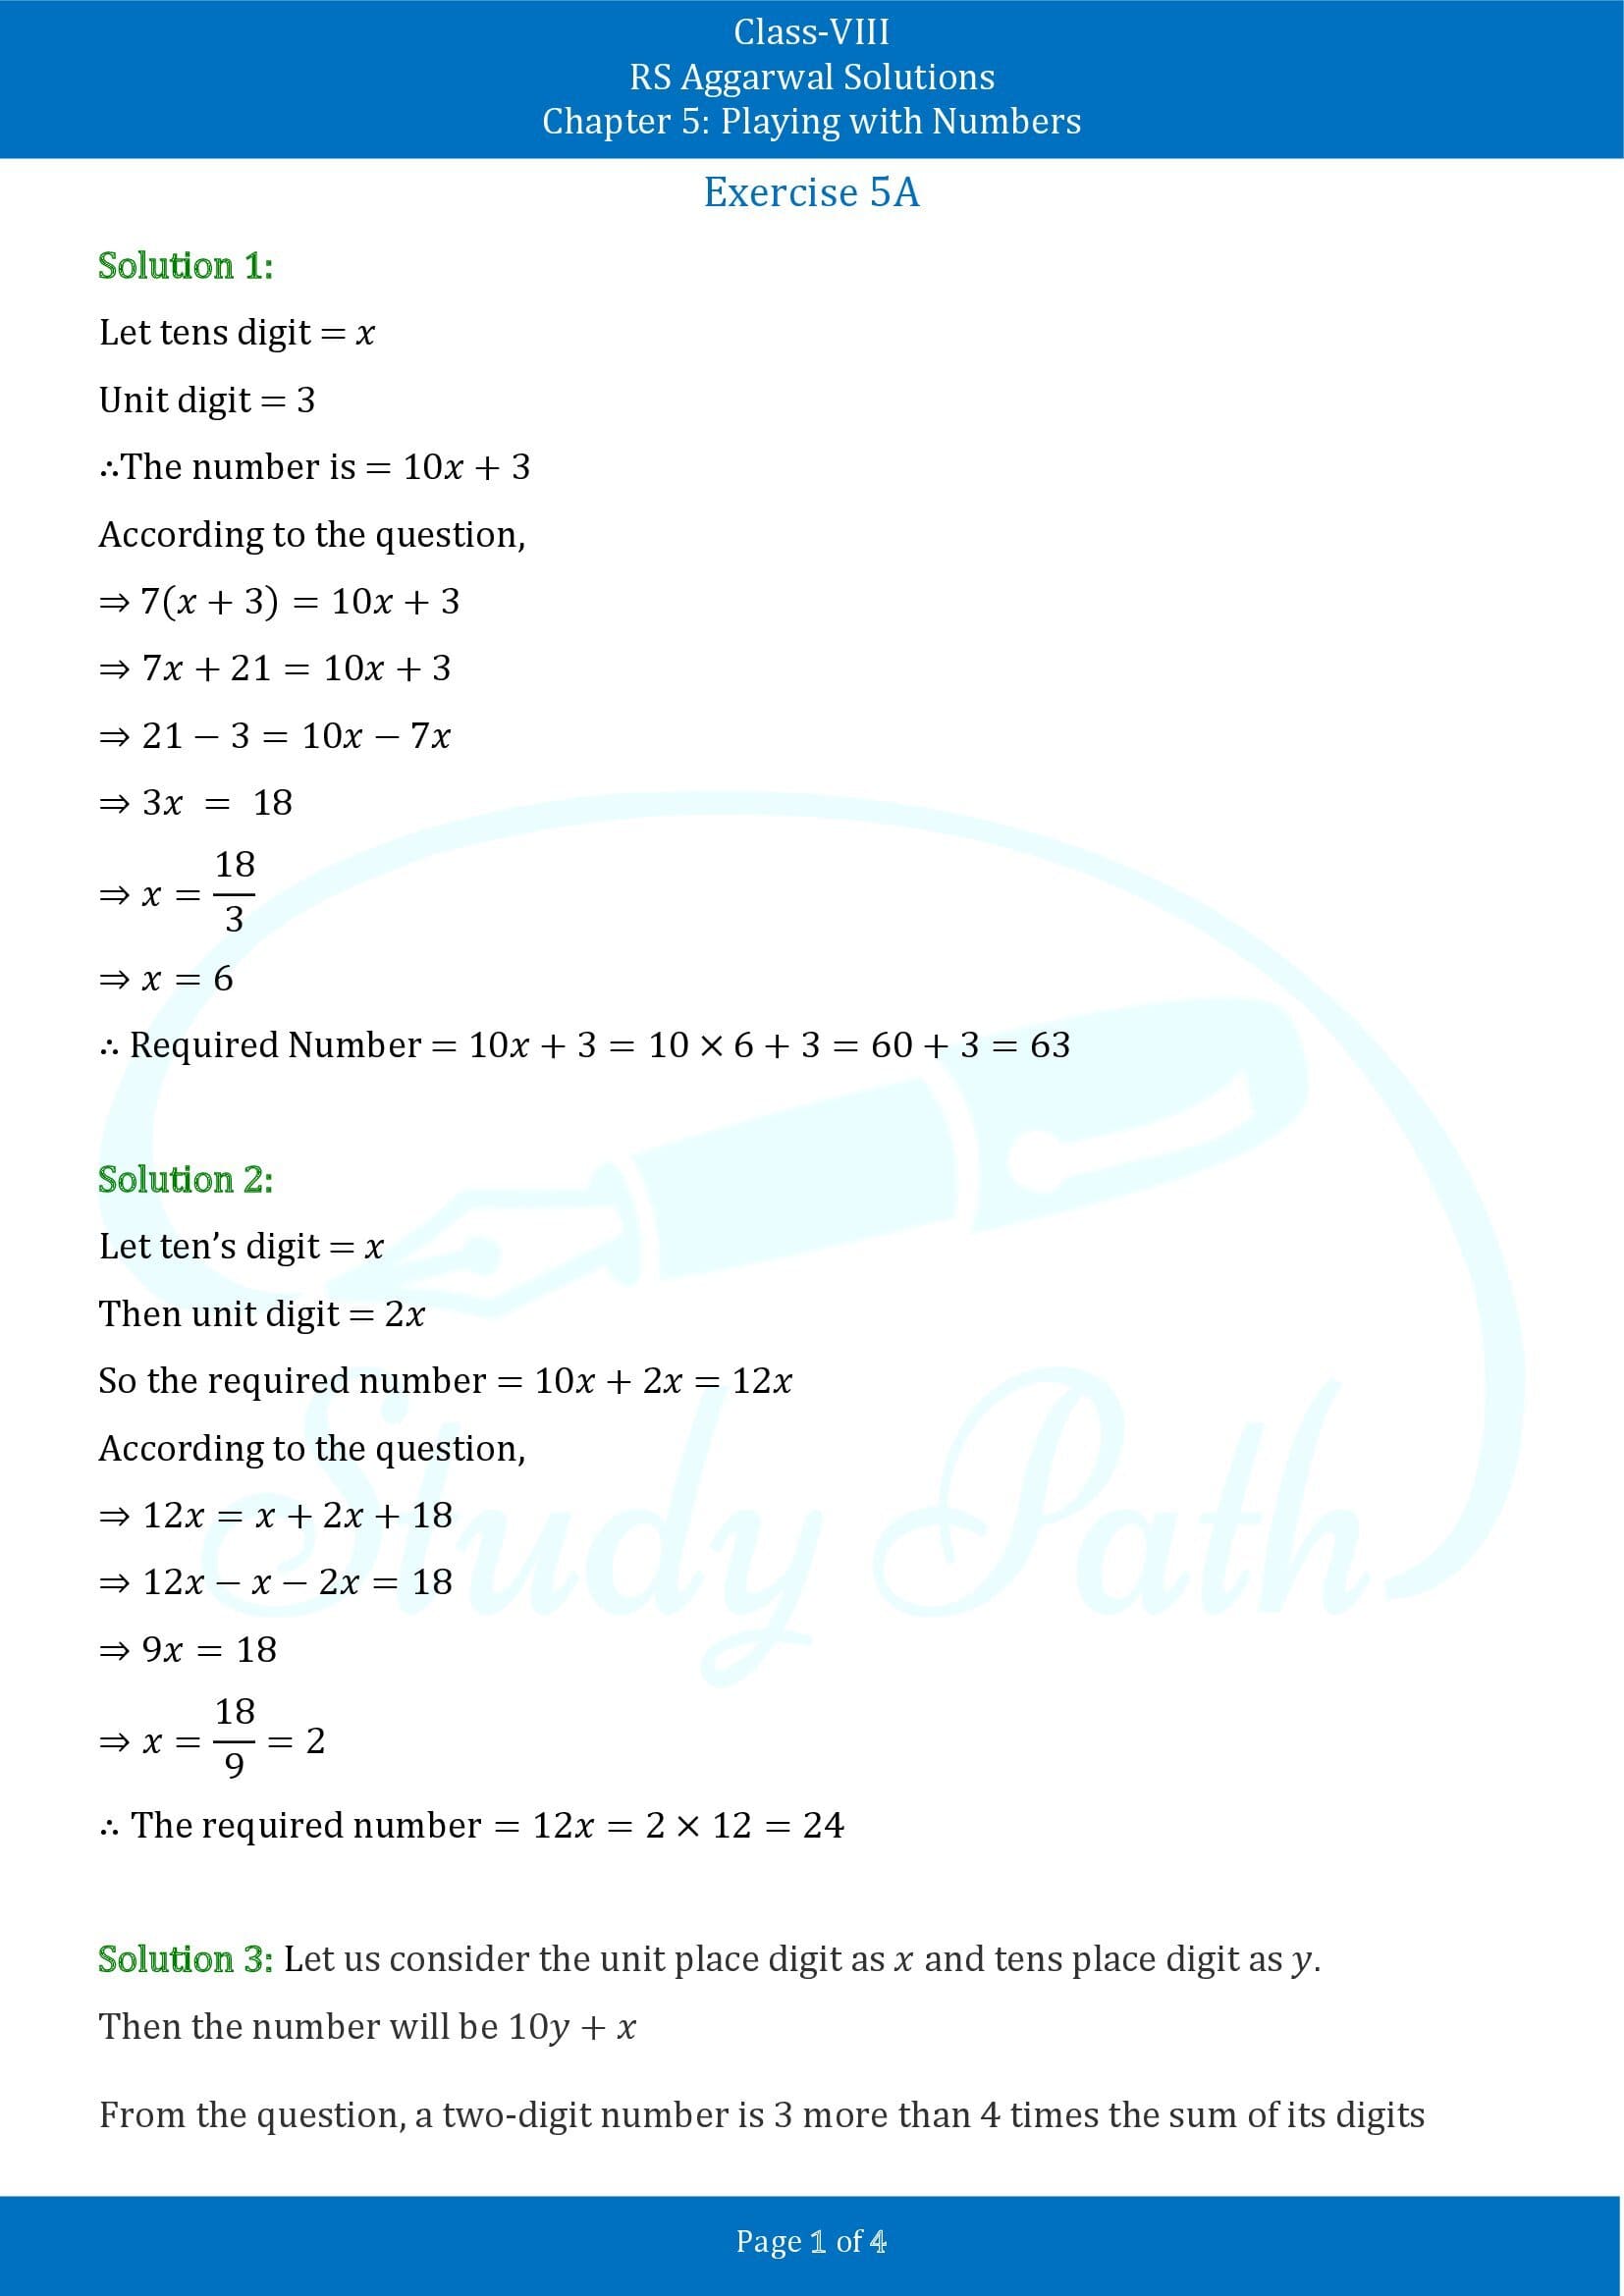 RS Aggarwal Solutions Class 8 Chapter 5 Playing with Numbers Exercise 5A 00001